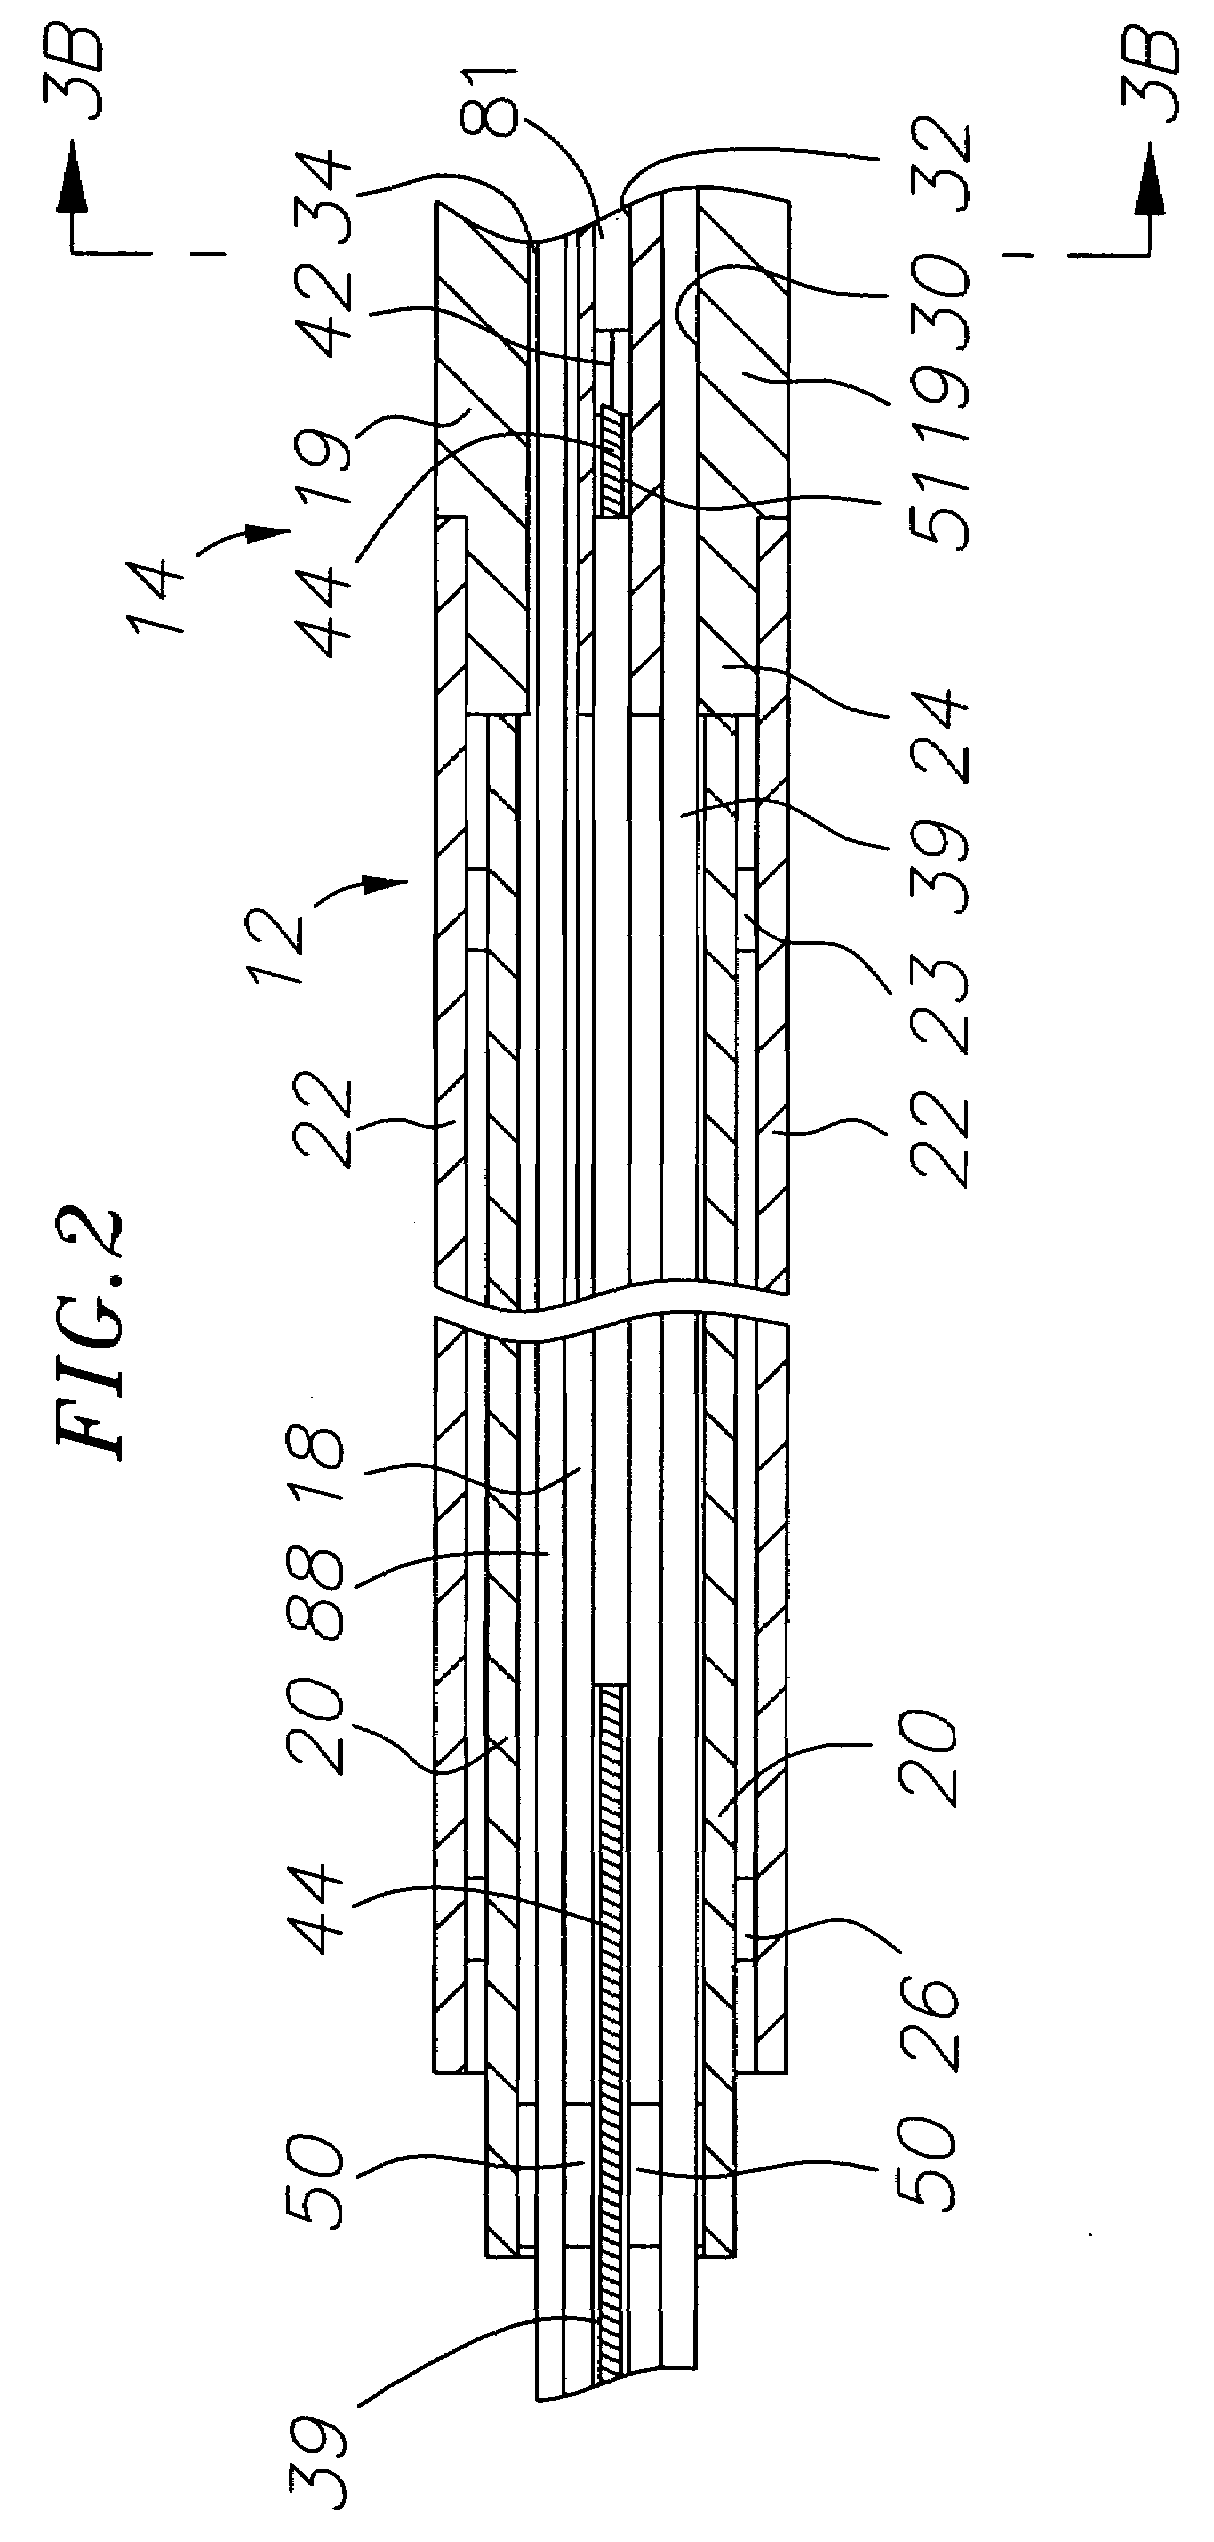 Ablation catheter with improved tip cooling